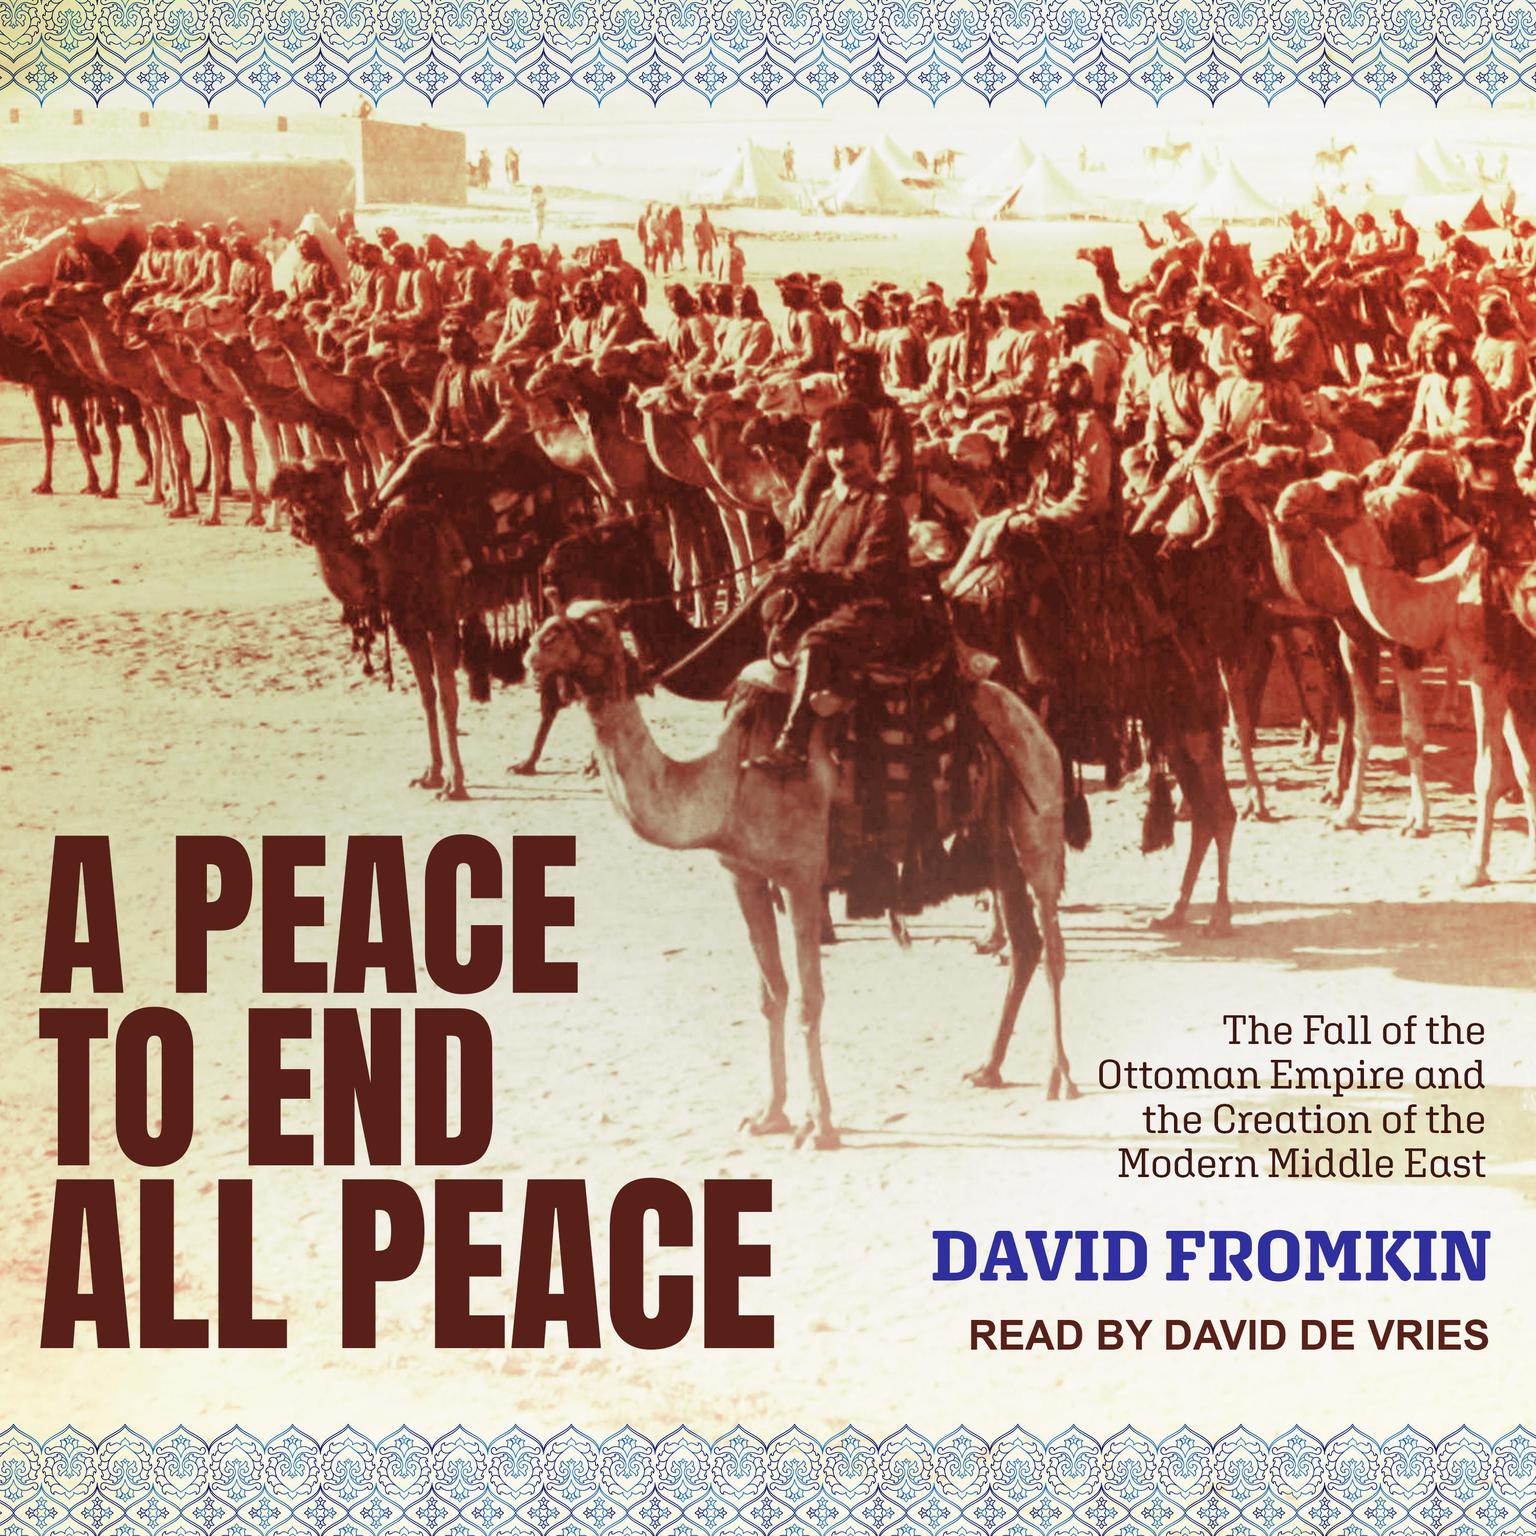 A Peace to End All Peace: The Fall of the Ottoman Empire and the Creation of the Modern Middle East Audiobook, by David Fromkin